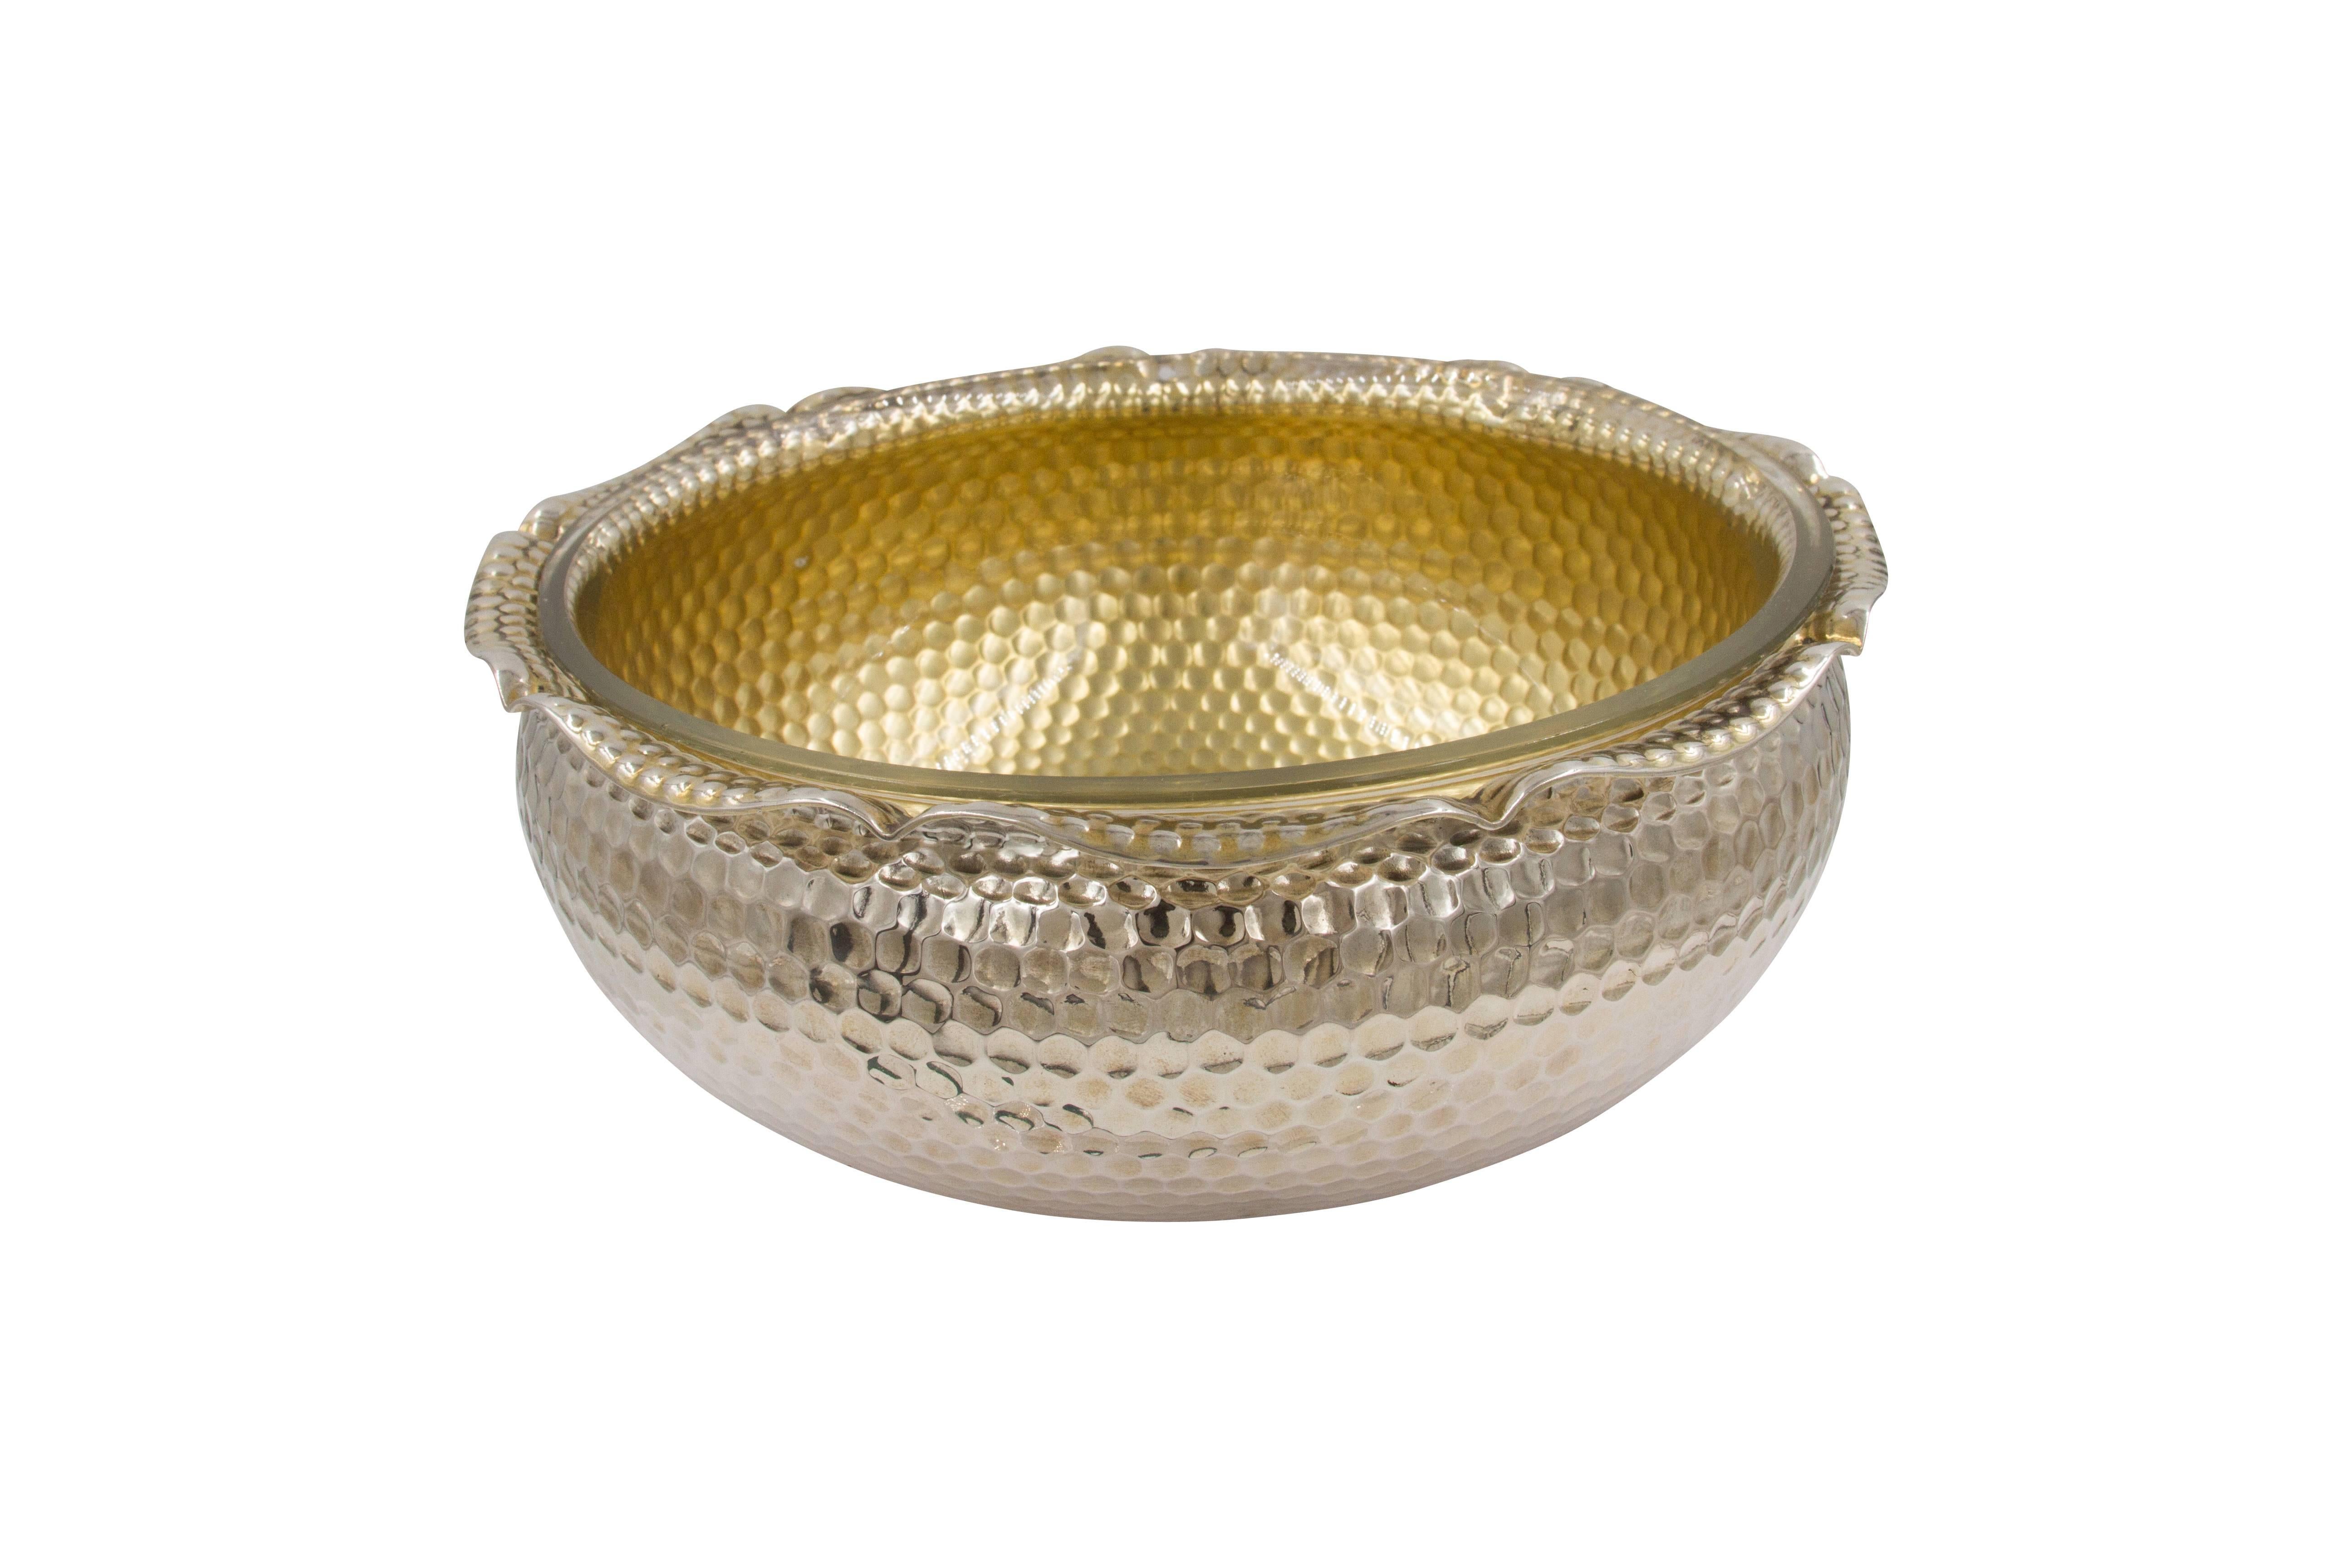 The pebble-like exterior of this hammered bowl brings a rustic yet elegant sensibility to your home. You can fill it with anything, even the most acidic foods because there's a removable glass liner (original) that protects the silver and makes for